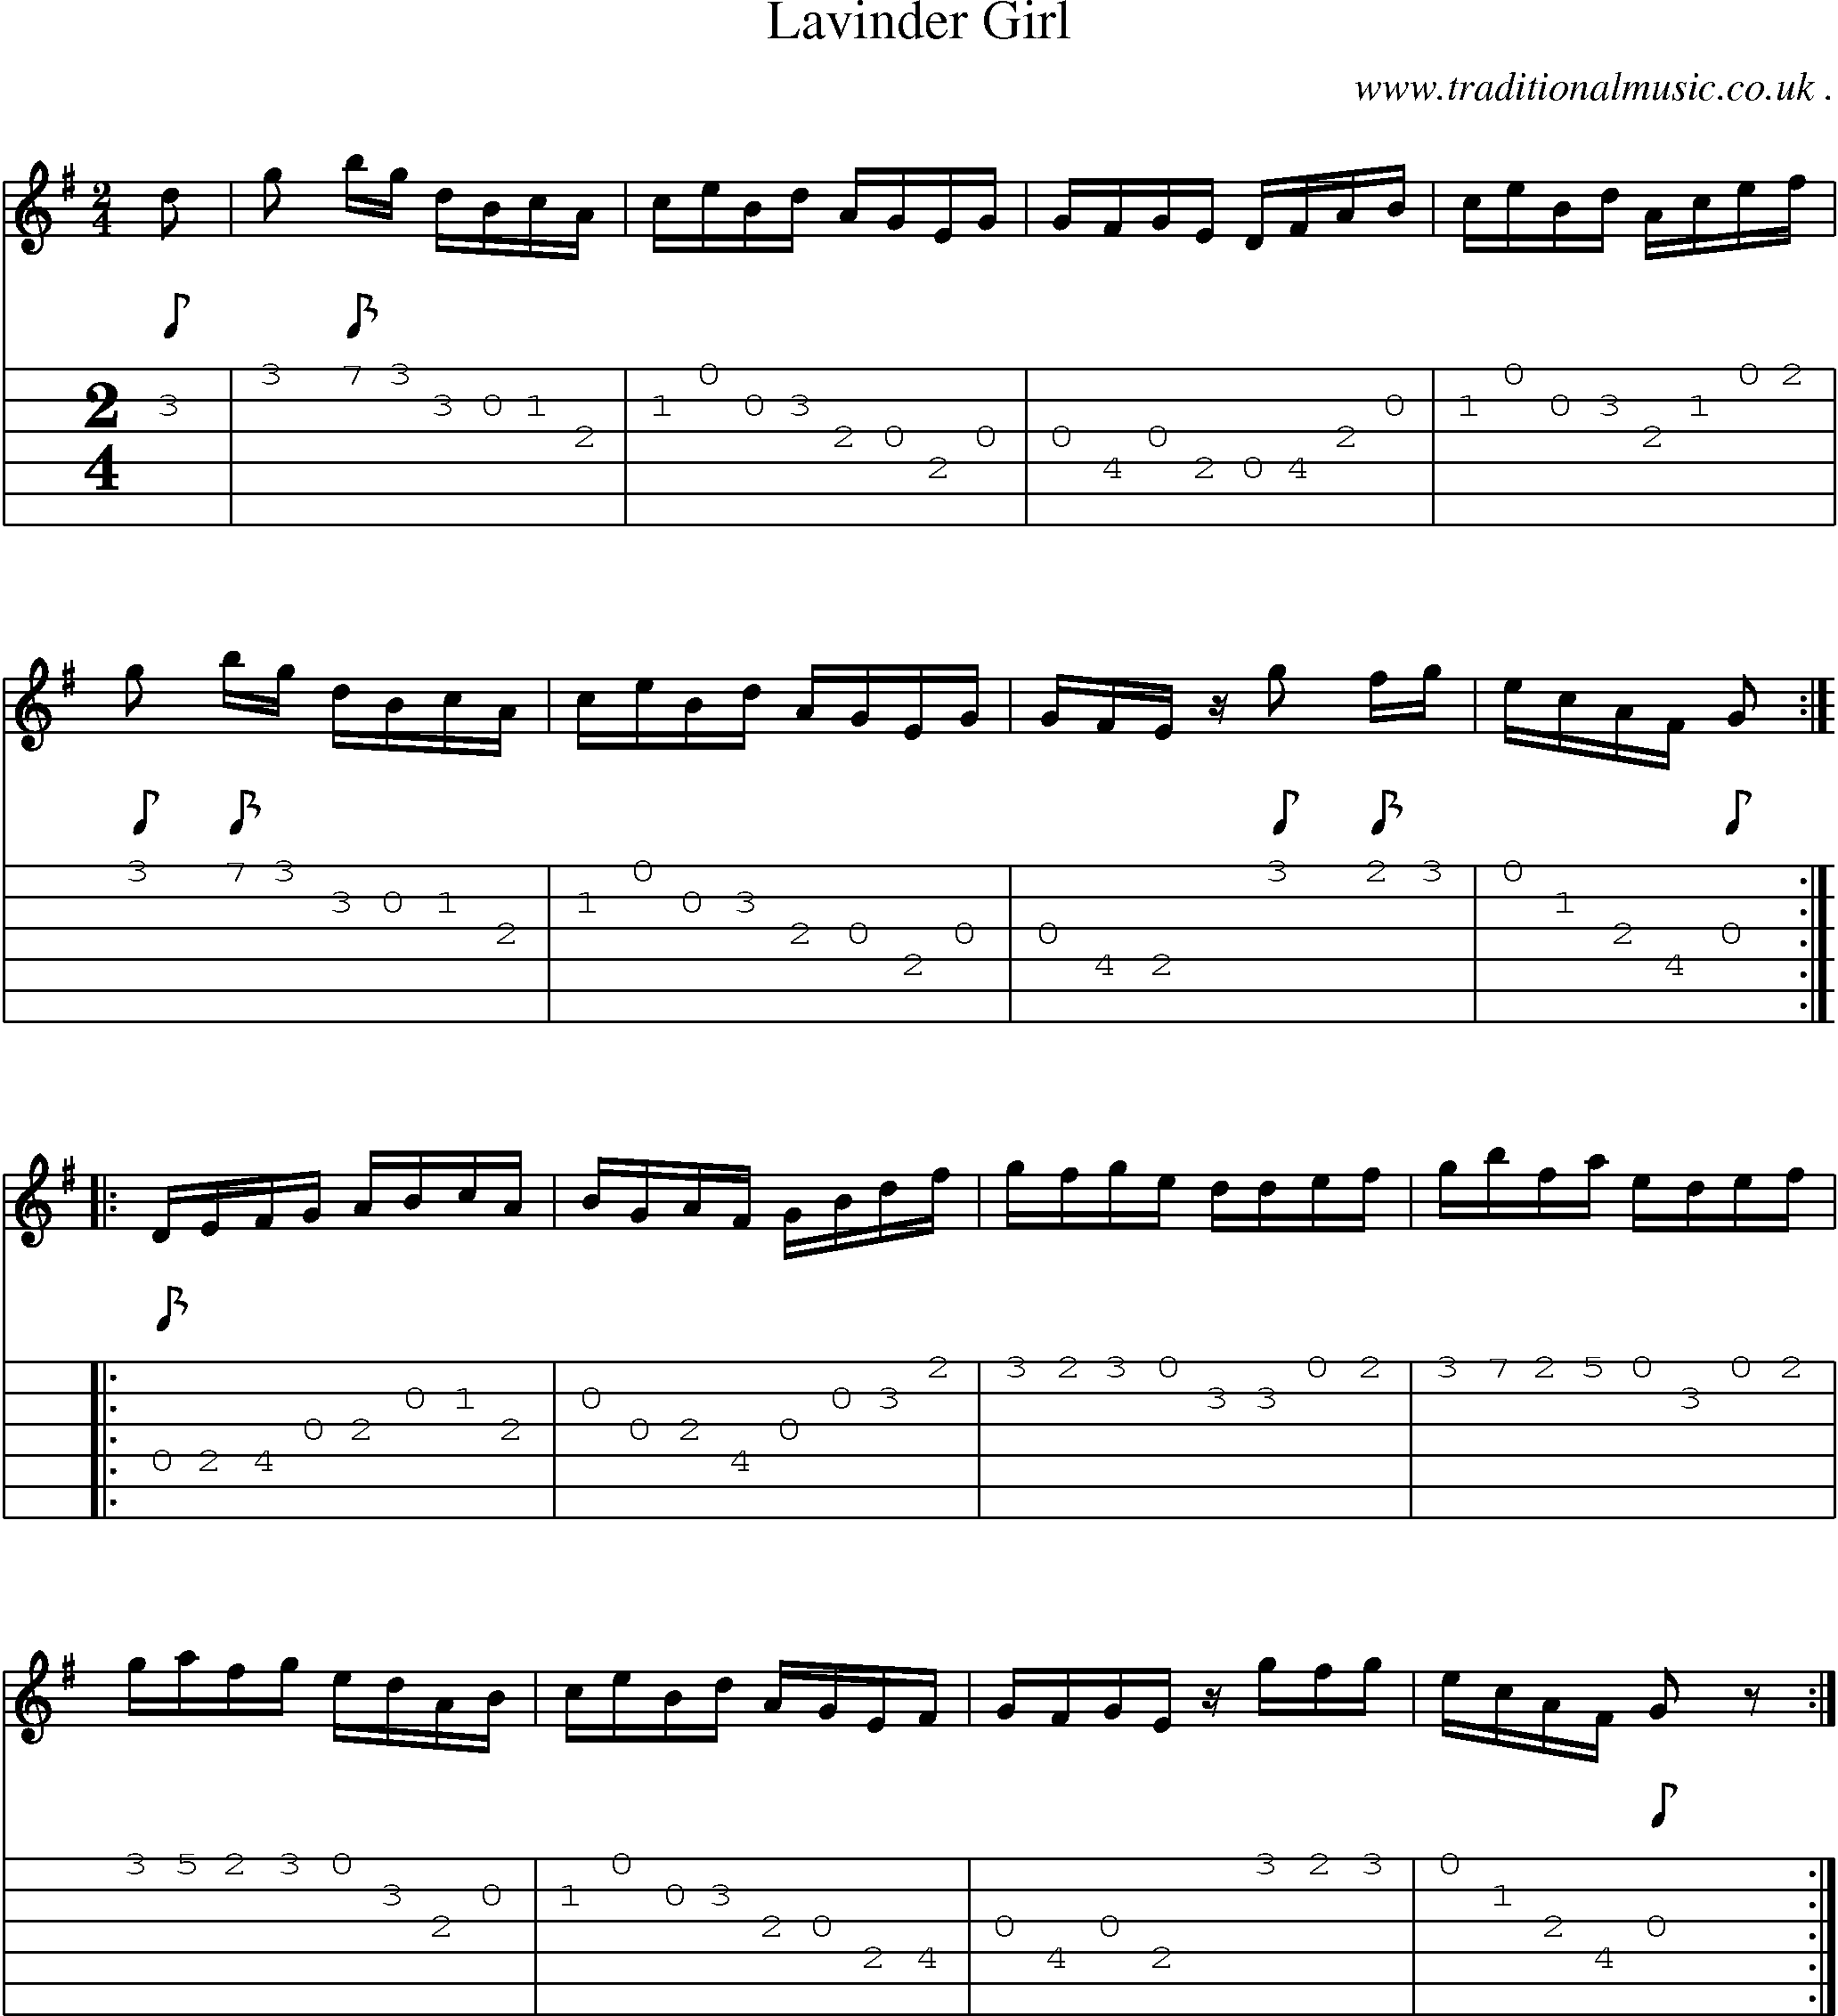 Sheet-Music and Guitar Tabs for Lavinder Girl